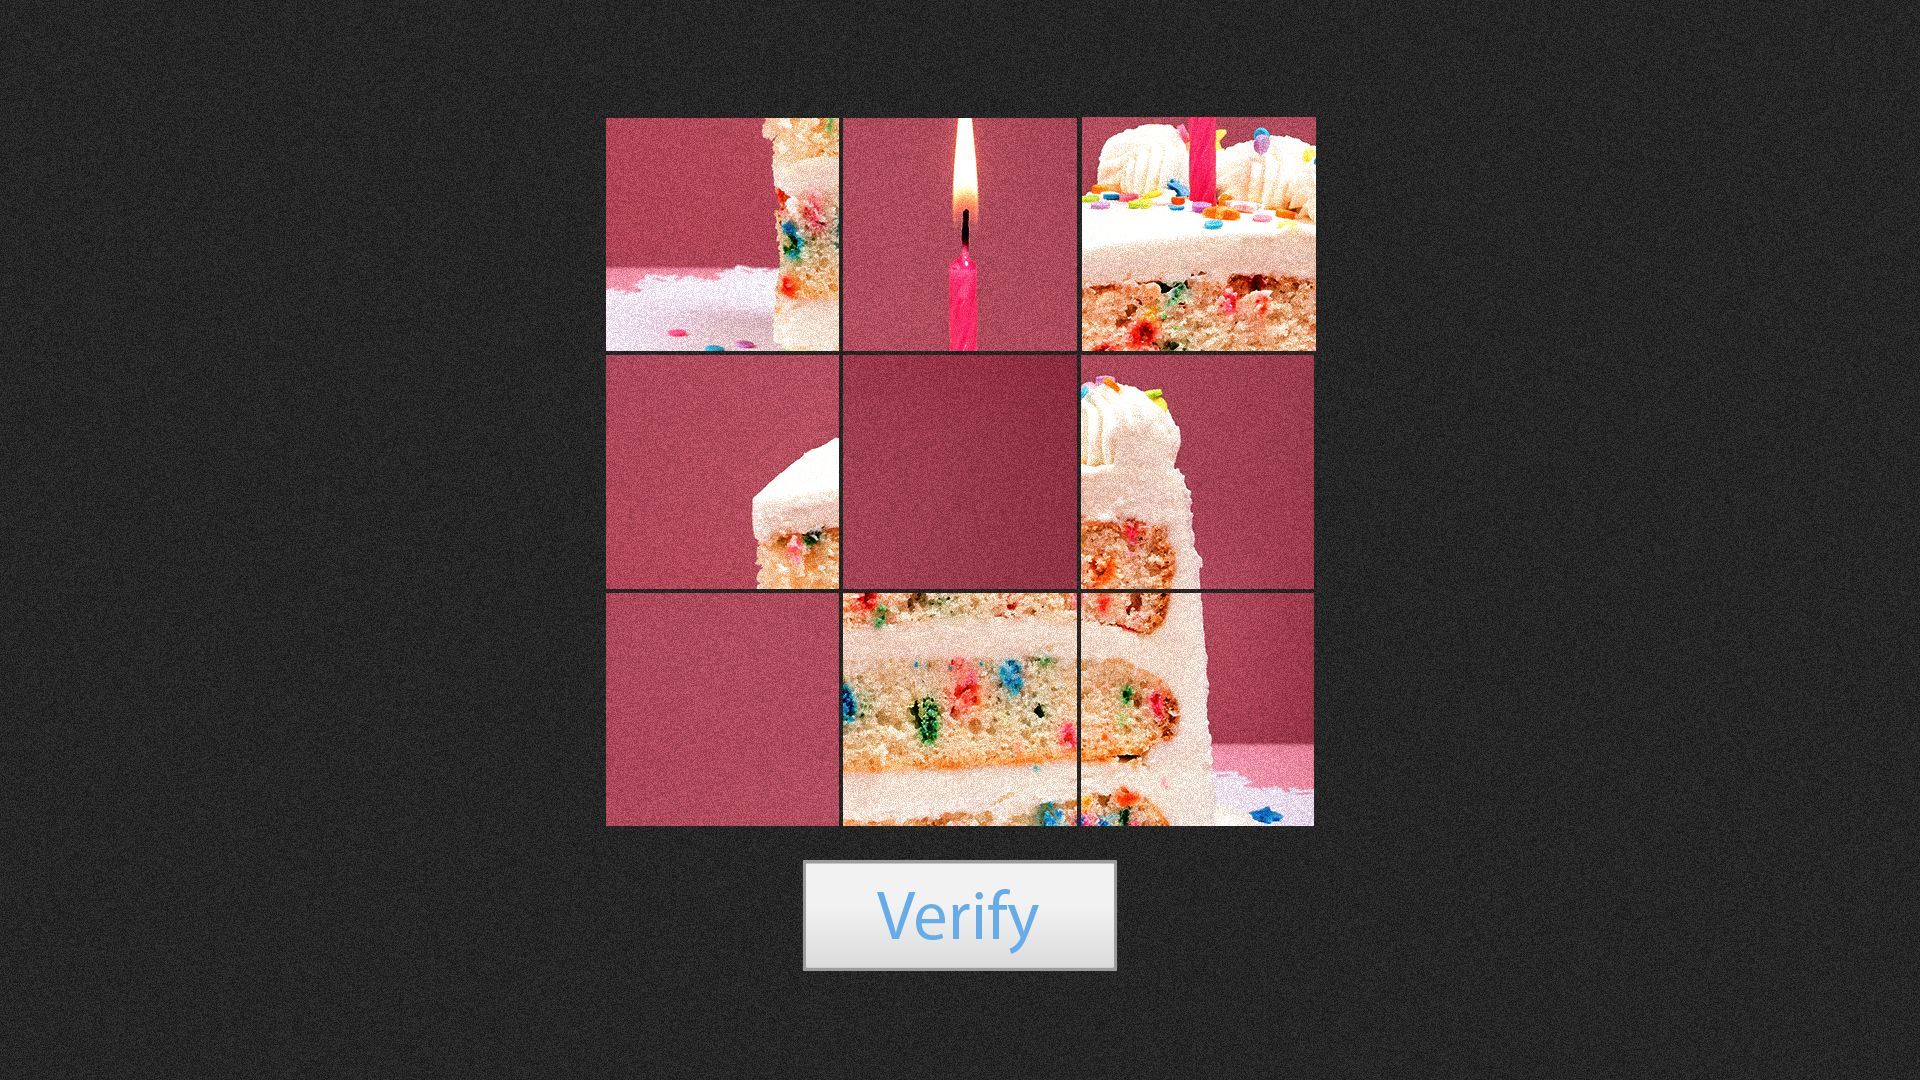 Illustration of a captcha prompt showing a mixed up slice of birthday cake with a candle